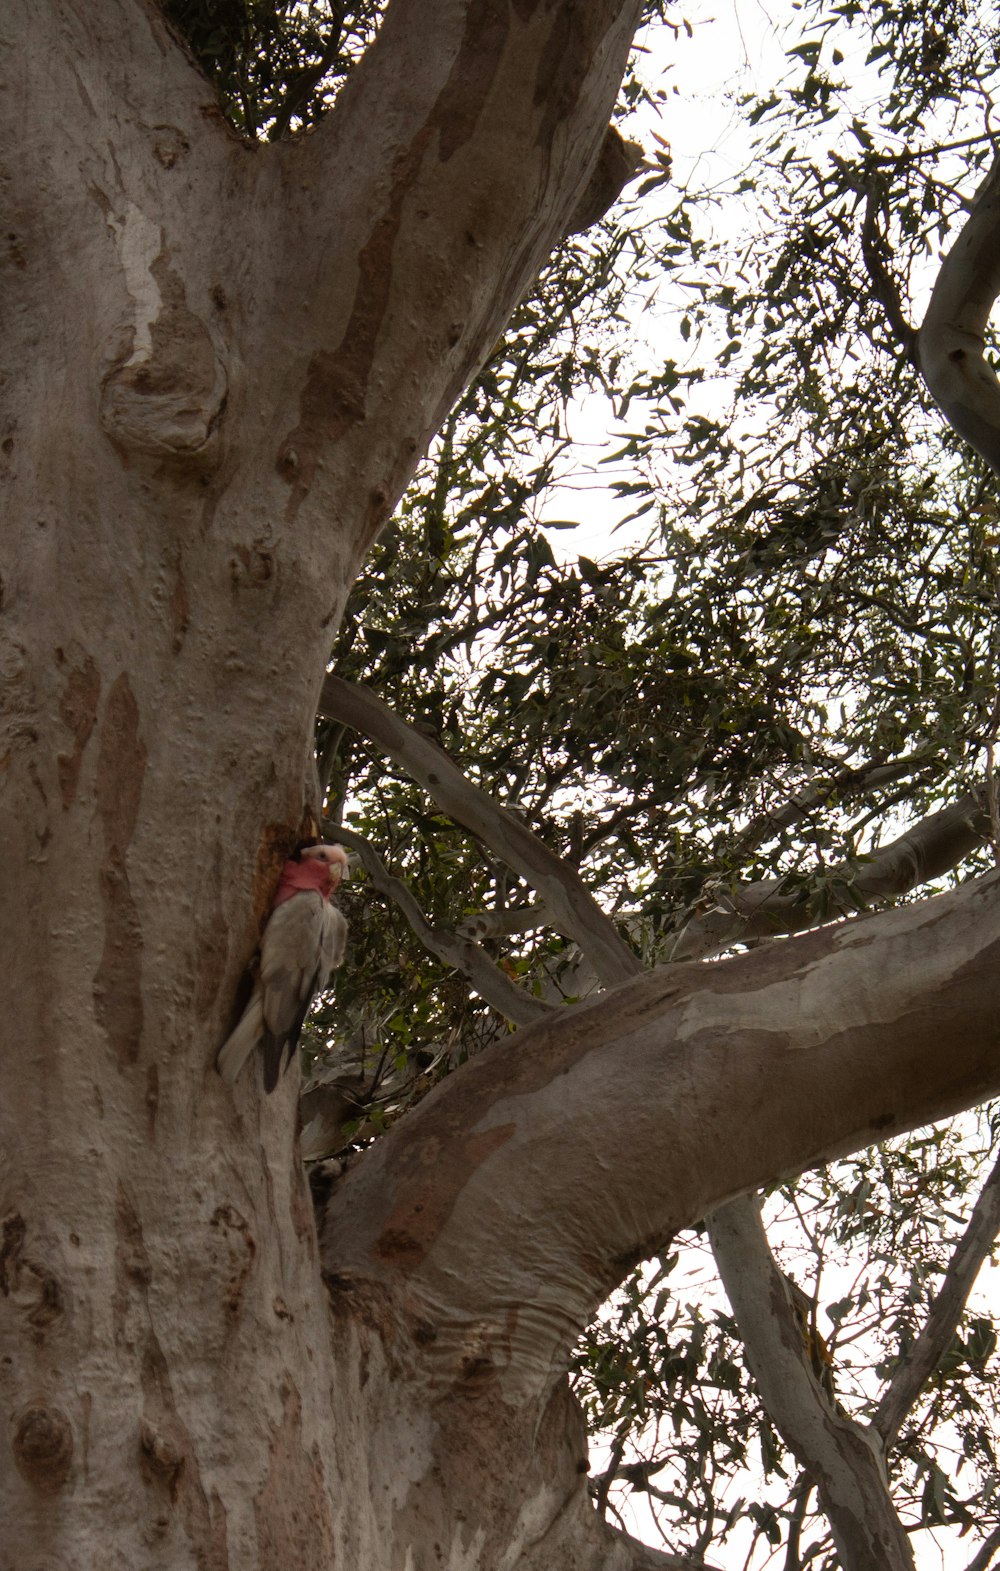 a bird perched on the trunk of a tree